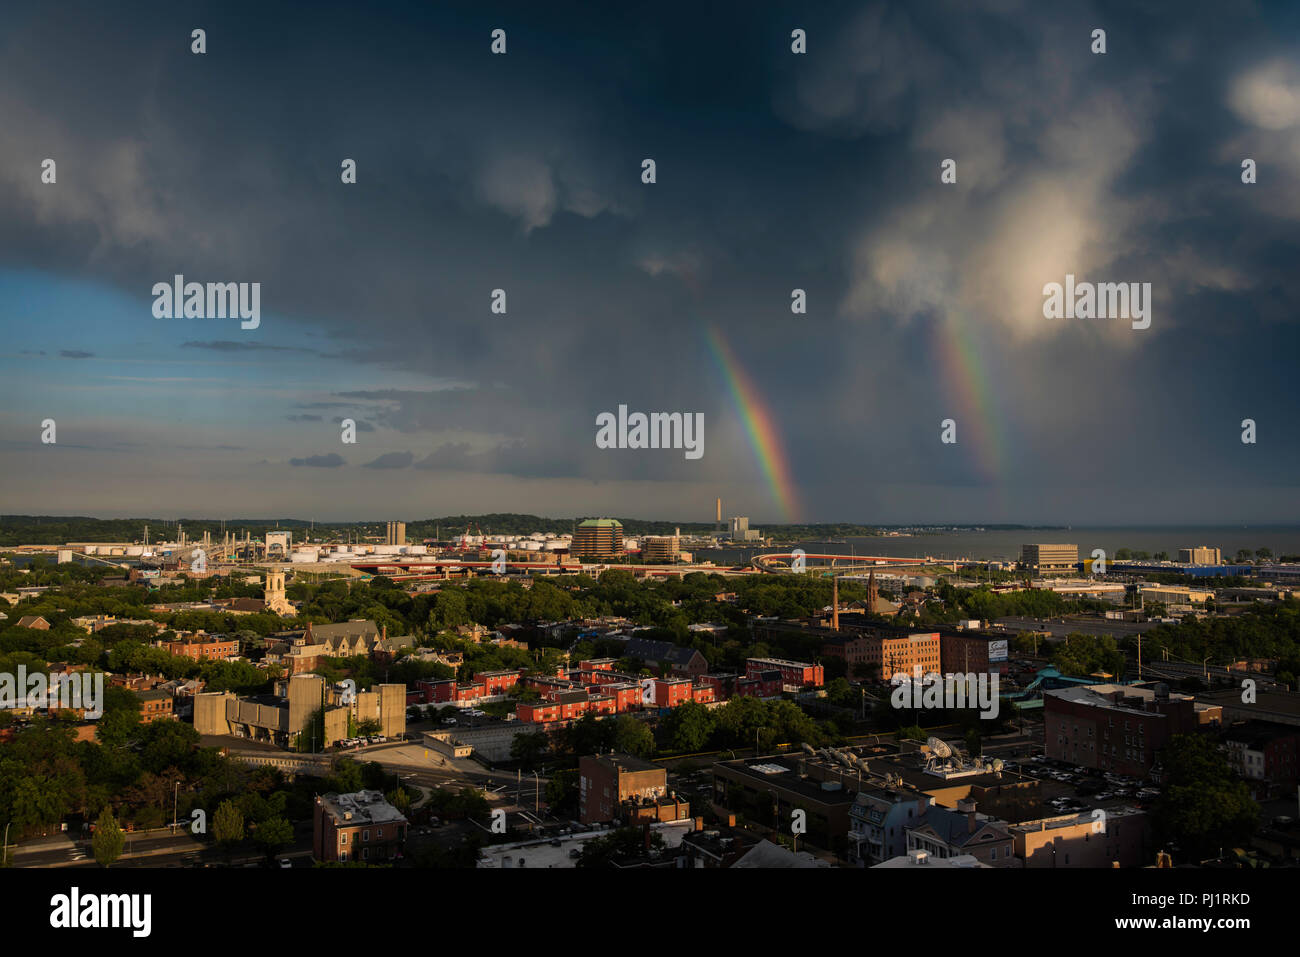 Ariel view of thunderstorm with double rainbow, New Haven, Ct, USA Stock Photo